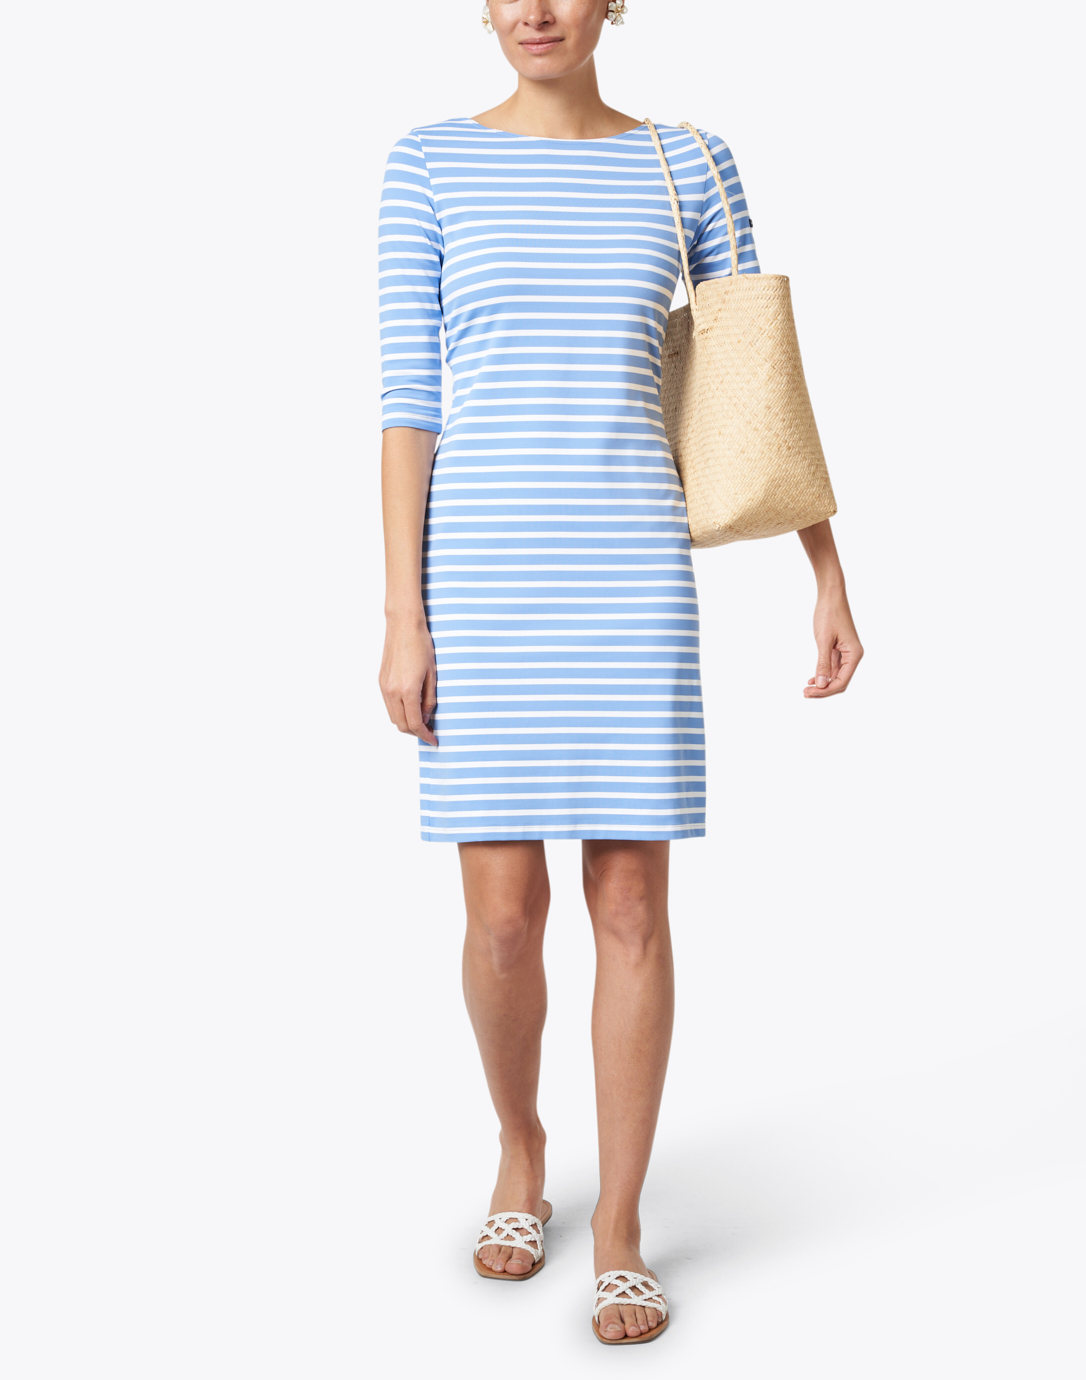 Propriano Blue and White Striped Jersey Dress